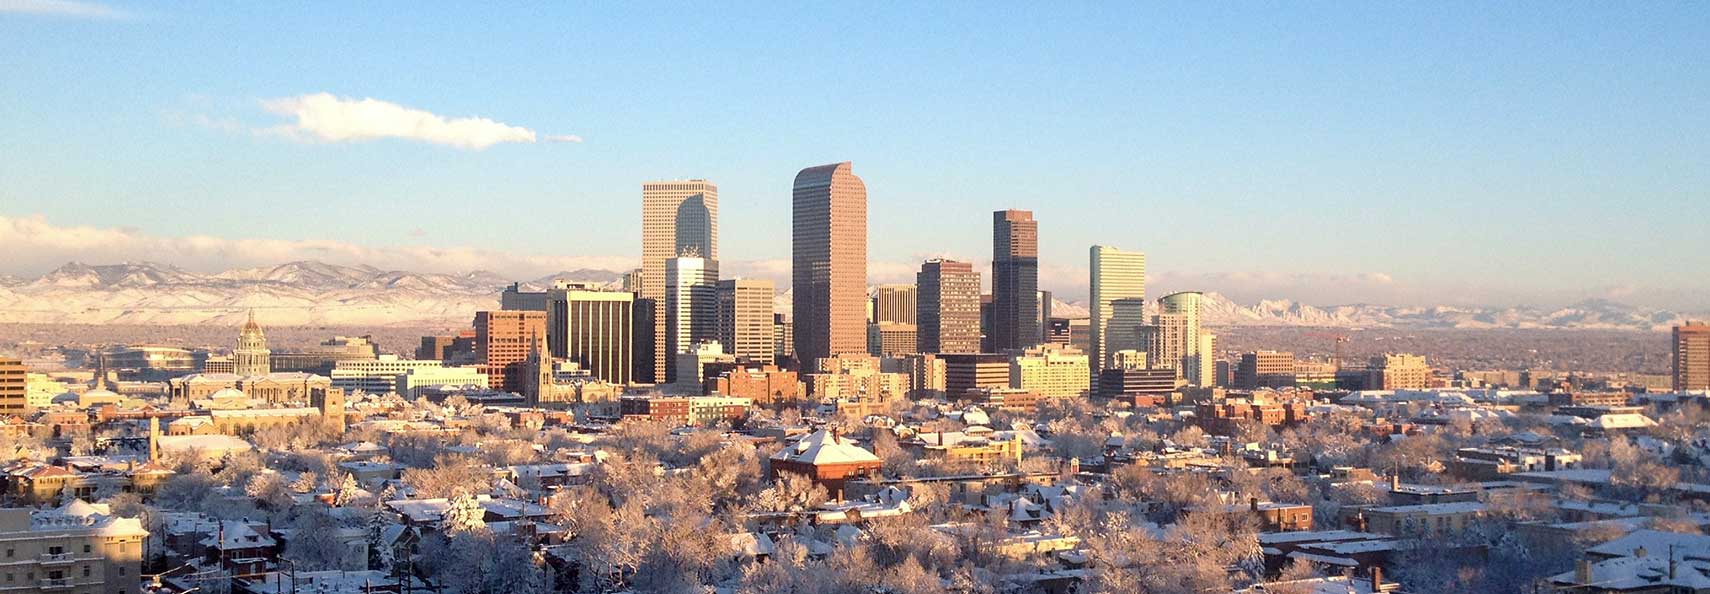 Denver in Winter, Colorado, Central Business District, Southern Rocky Mountains in background